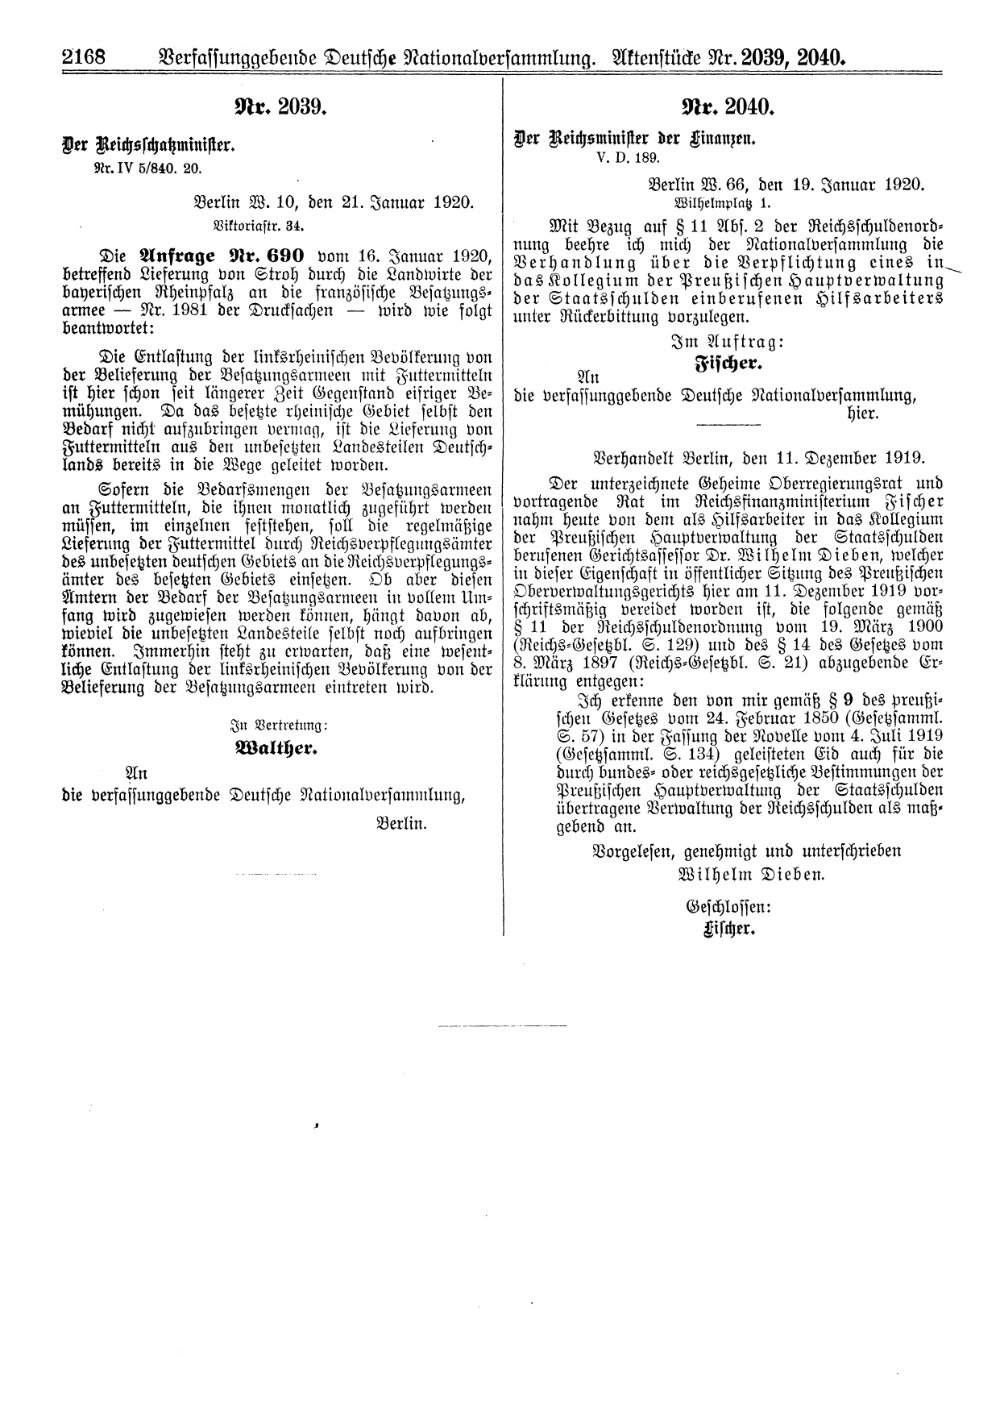 Scan of page 2168